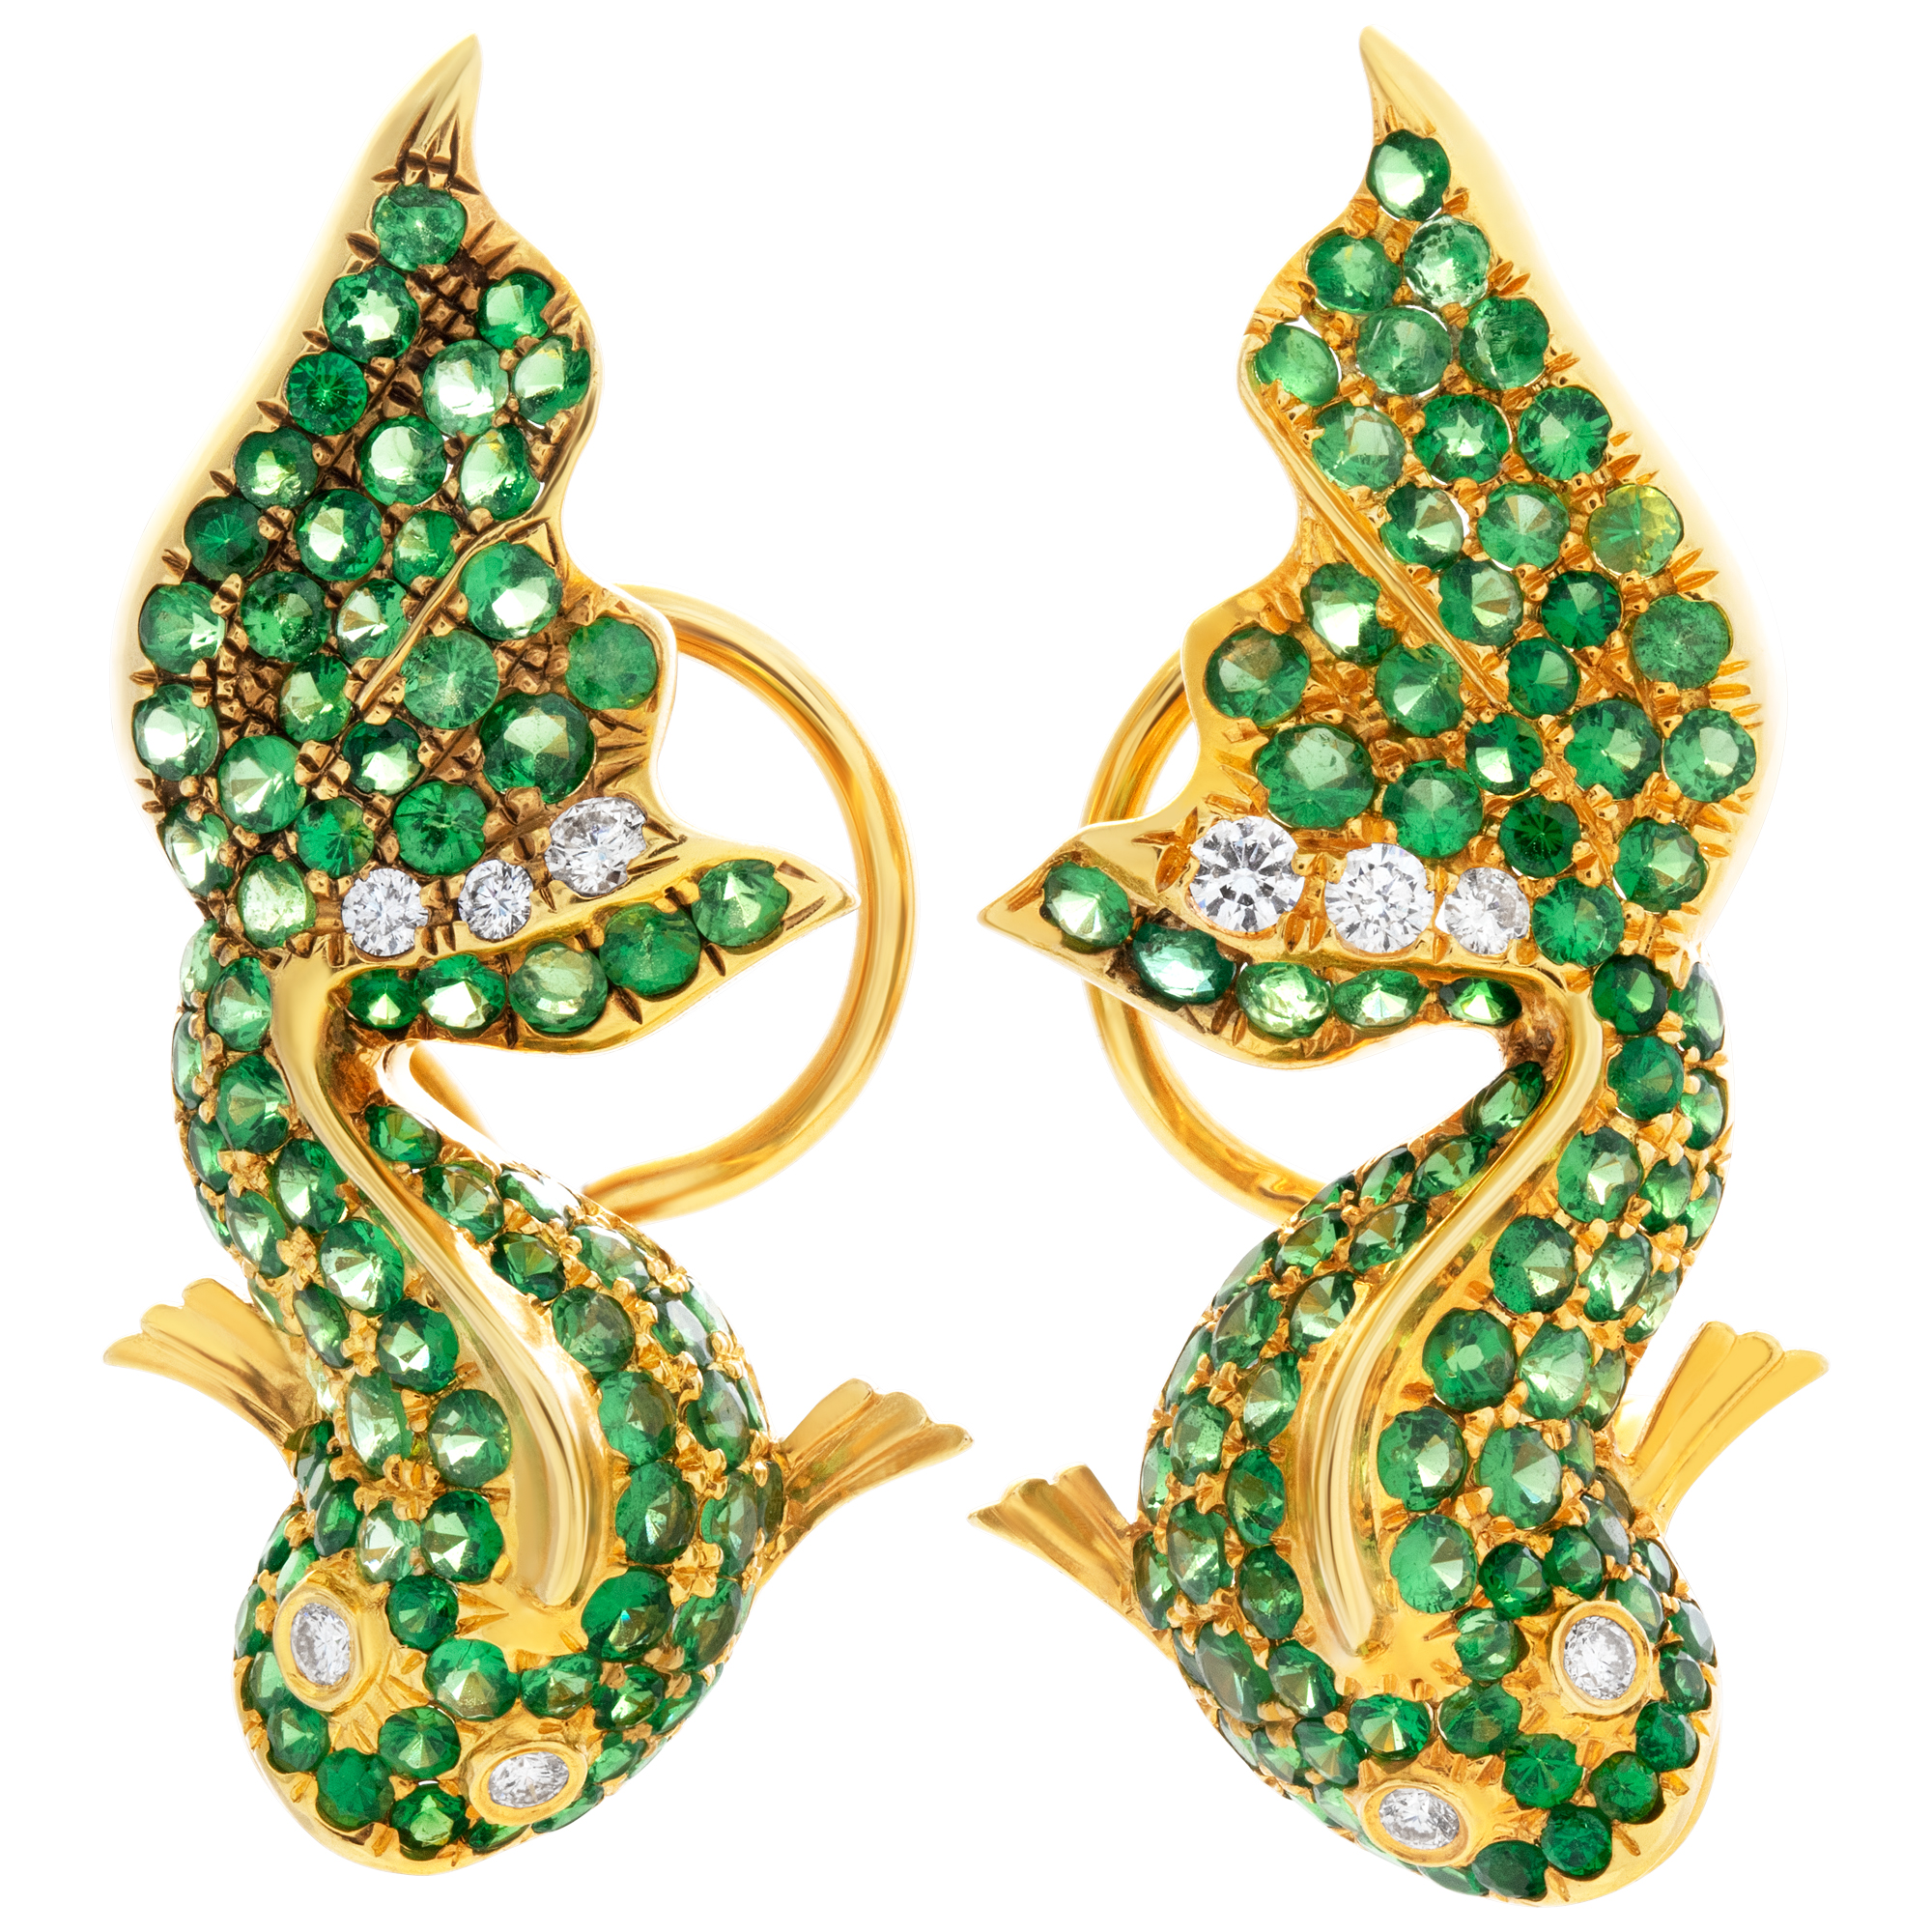 Koy Fish Earrings in 18k yellow gold with pave peridot and diamond accents